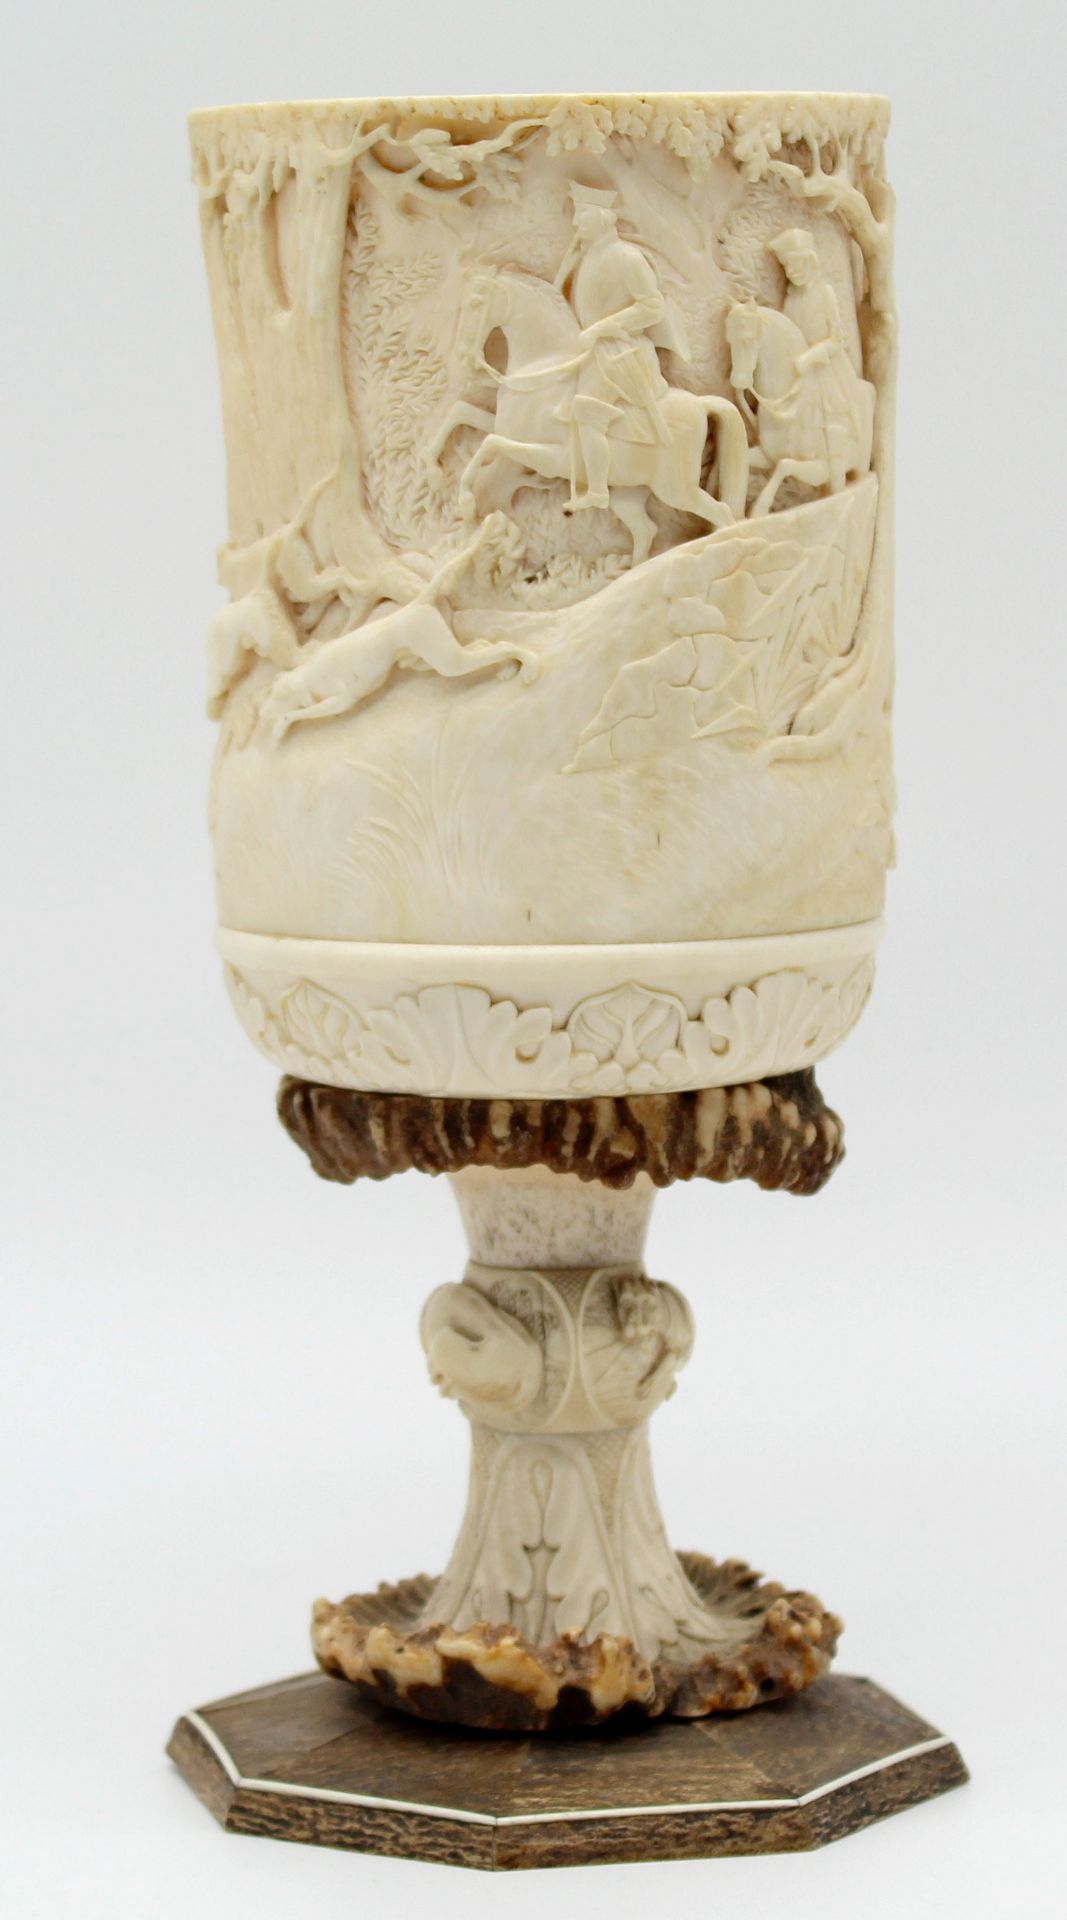 Ivory and stag horn around 1900. Probably Erbach. Hunting trophy.